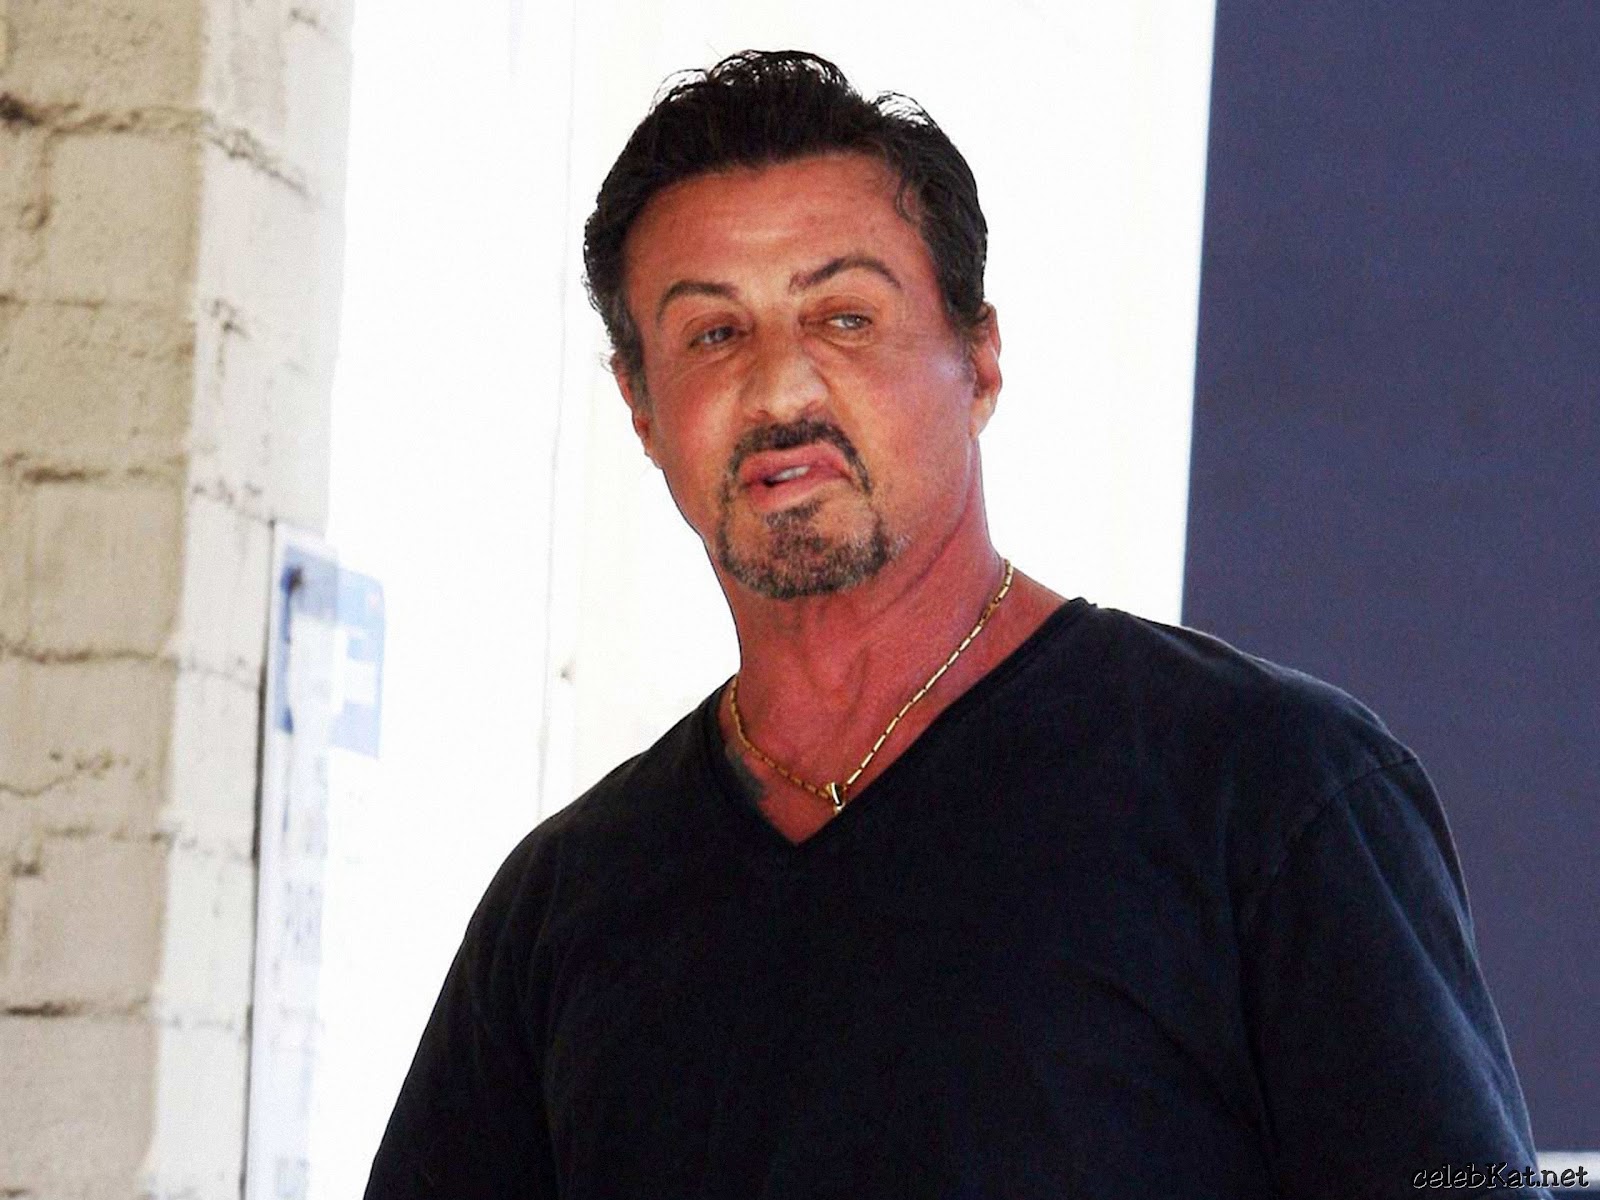 ... ALL ABOUT HOLLYWOOD STARS: Sylvester Stallone New HD Wallpapers 2012